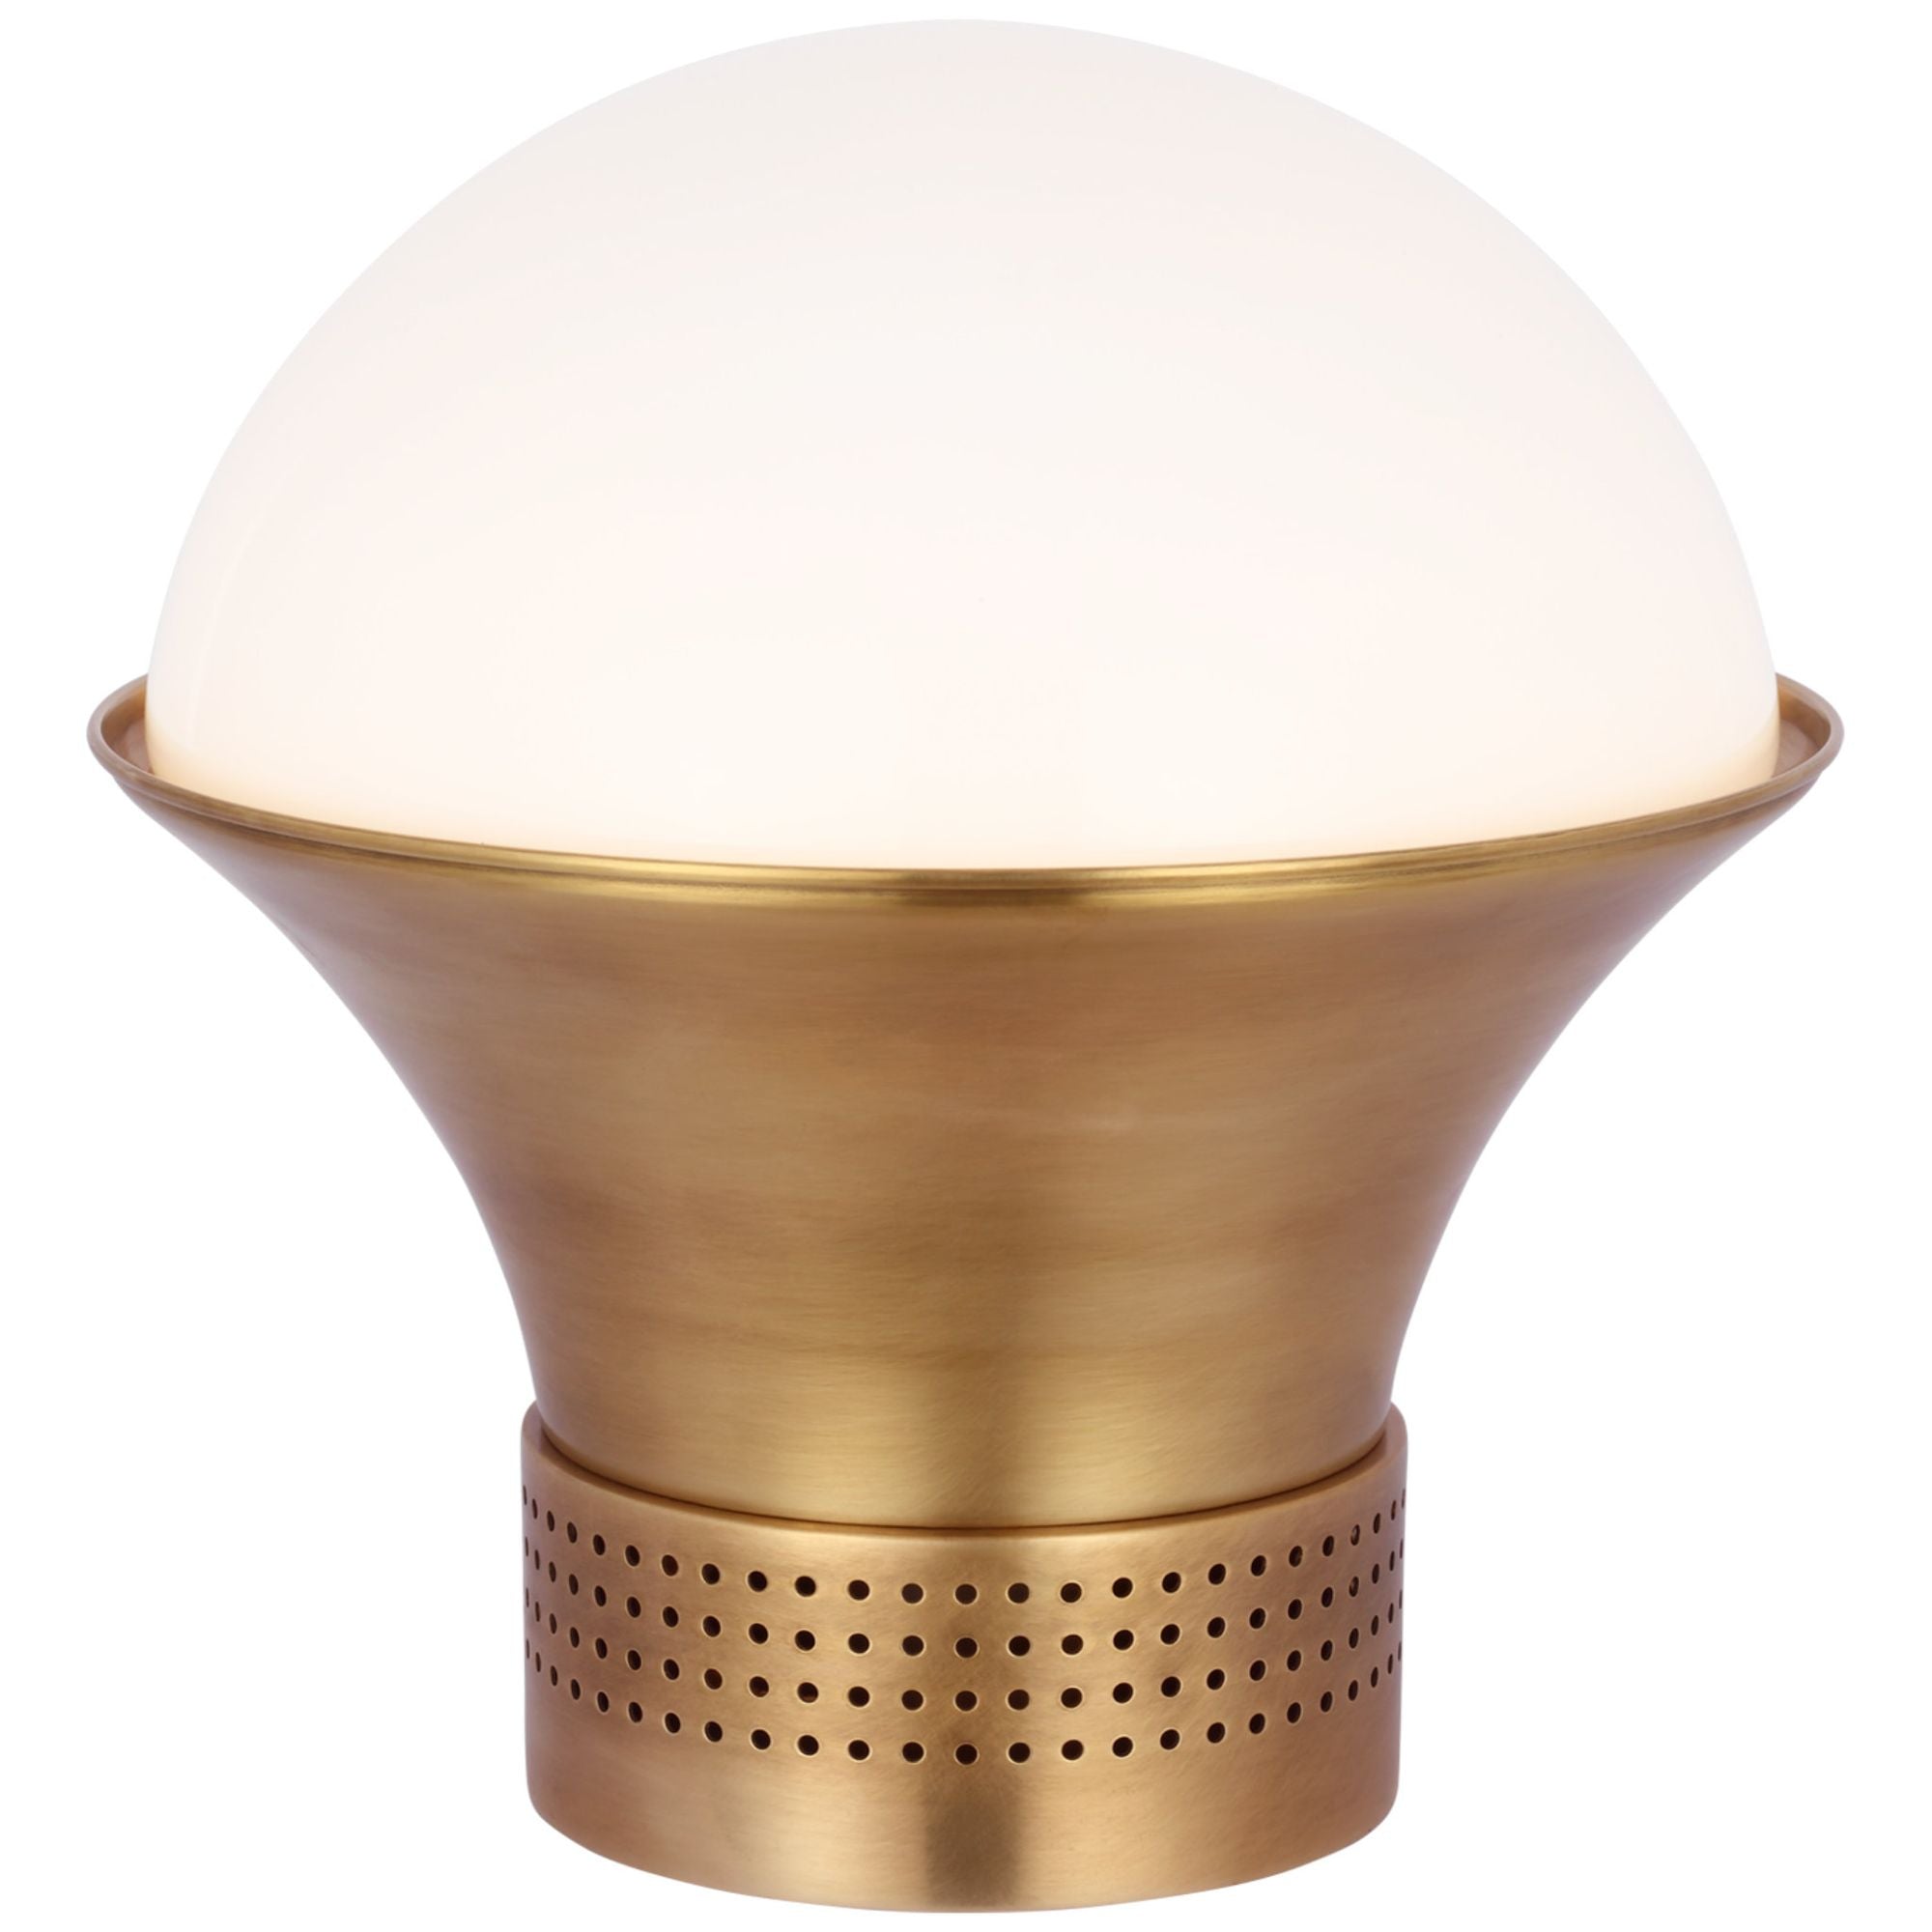 Kelly Wearstler Precision Medium Table Lantern in Antique-Burnished Brass with White Glass